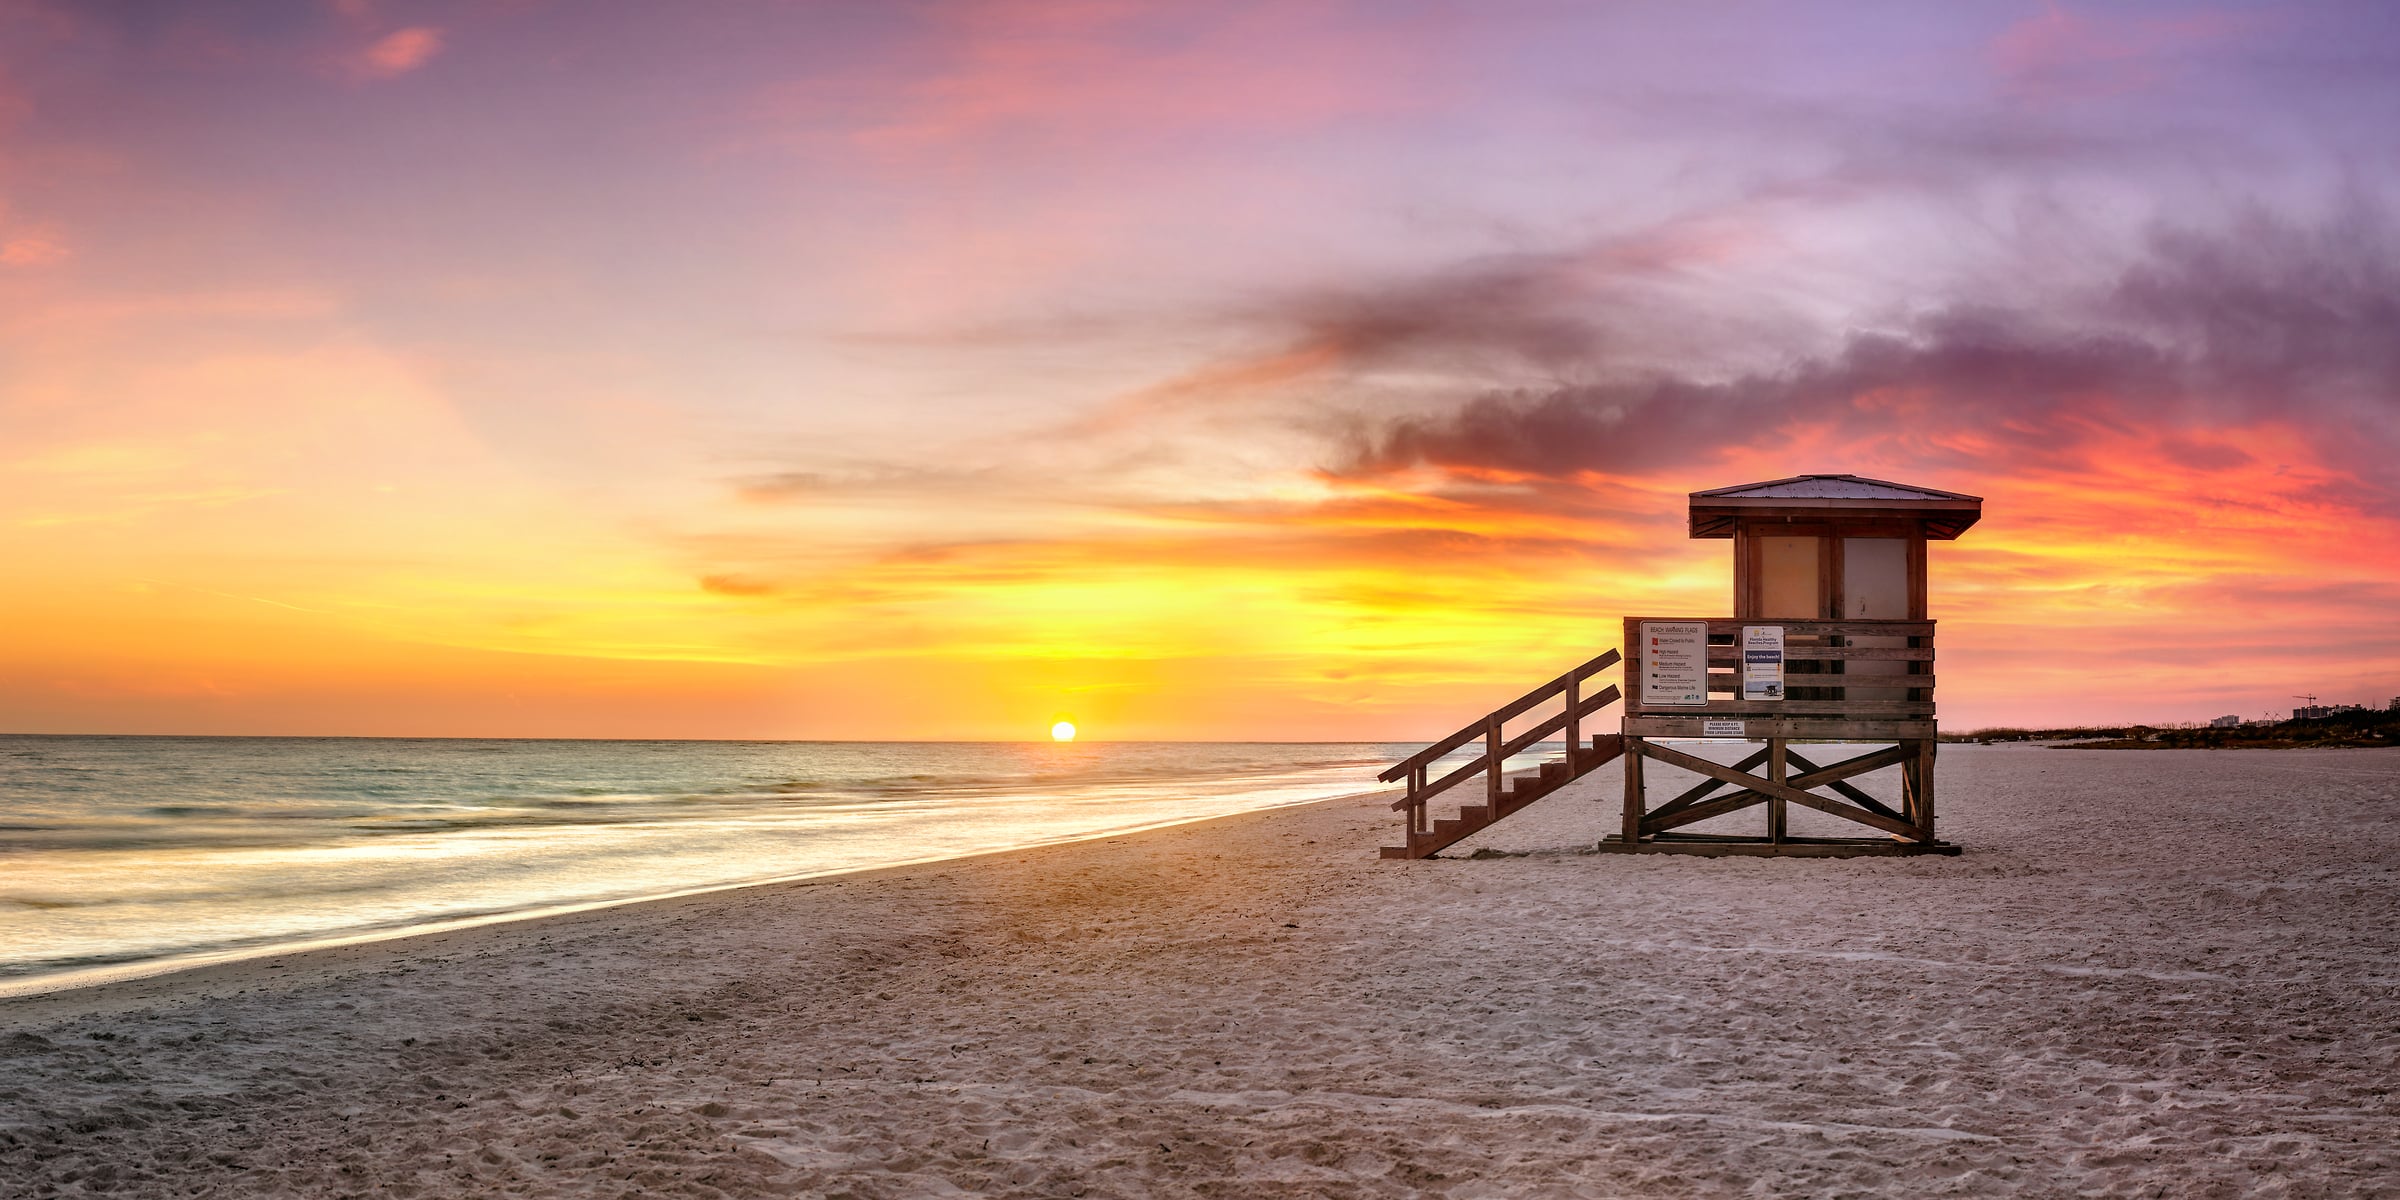 218 megapixels! A very high resolution, large-format VAST photo print of a Florida beach at sunset with a lifeguard stand; photograph created by Phil Crawshay in Lido Beach, Sarasota, Florida.